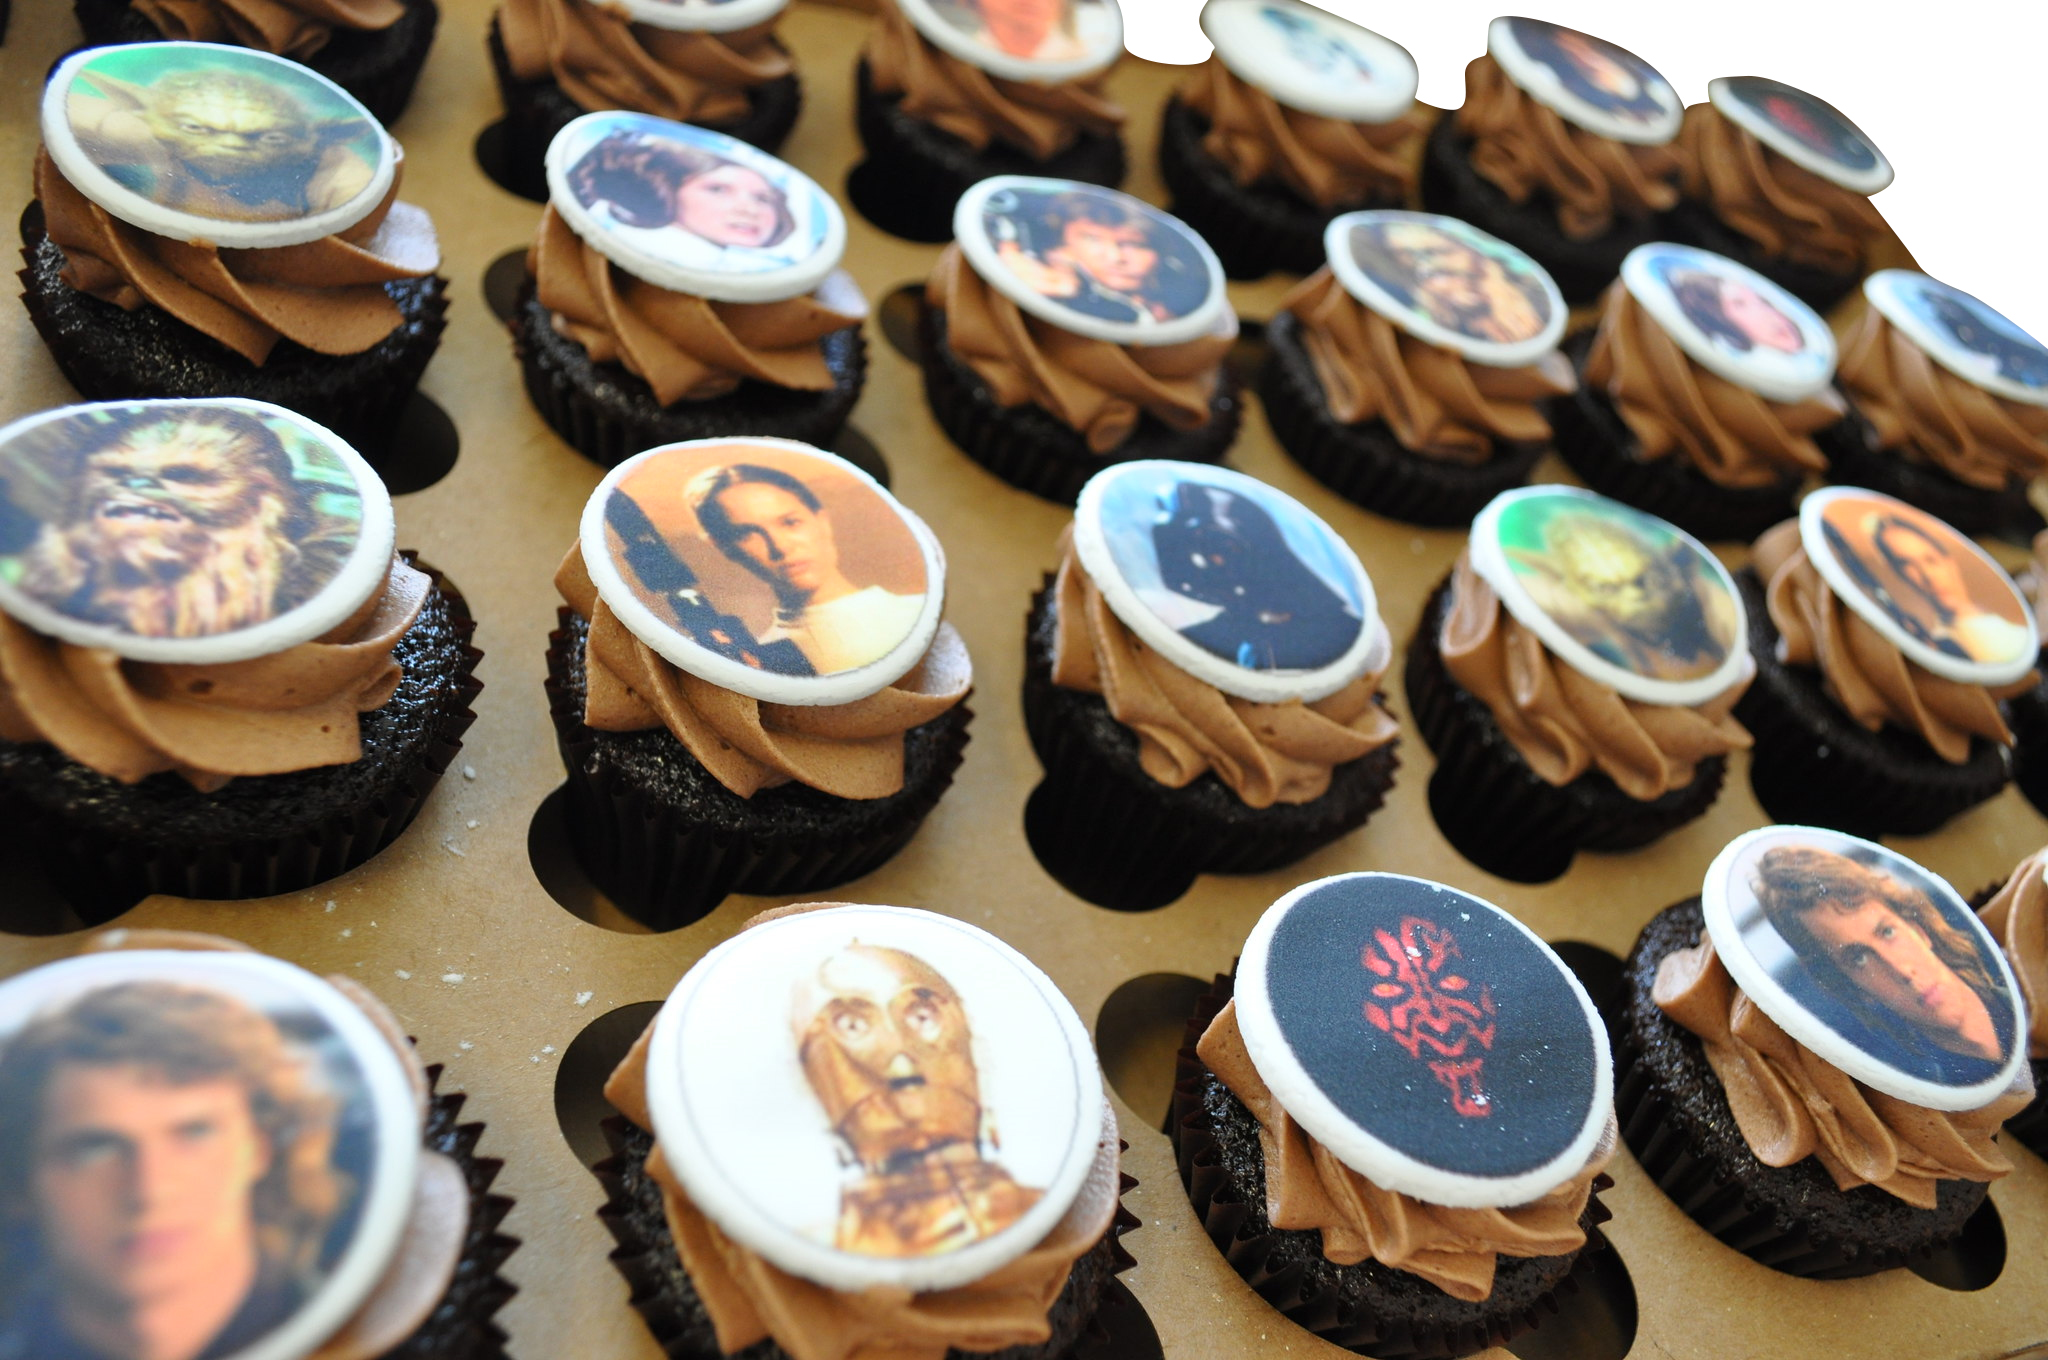 Star Wars Theme Cupcakes - Pack of 6